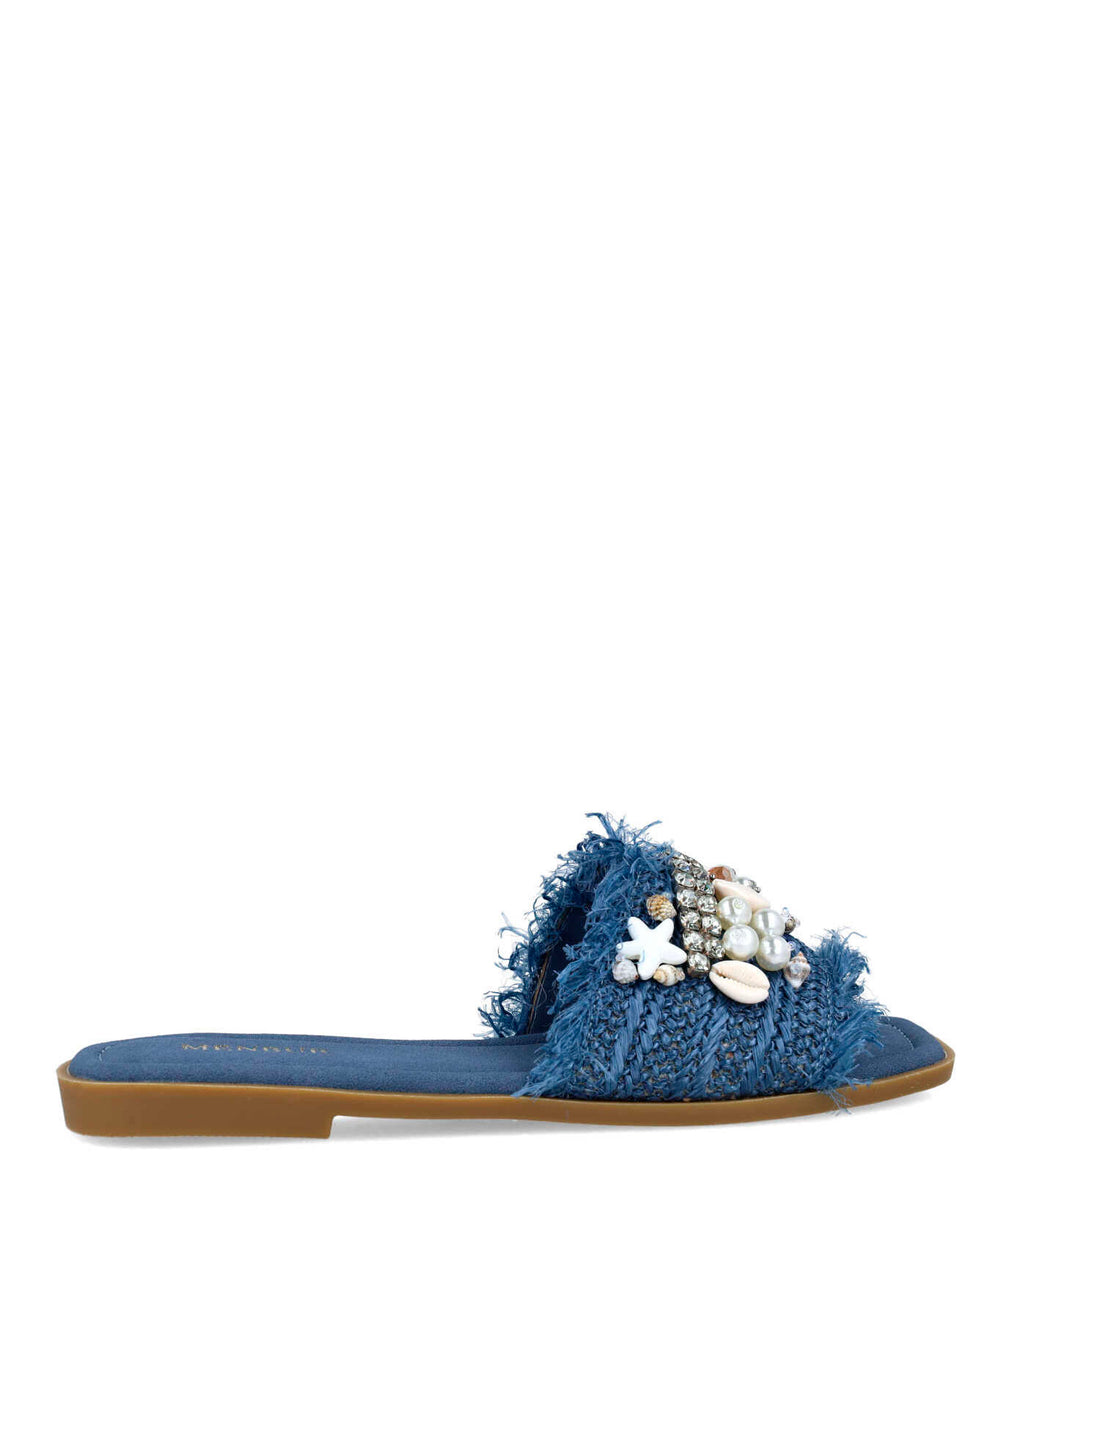 Blue Slippers With Embellishments_25386_51_01